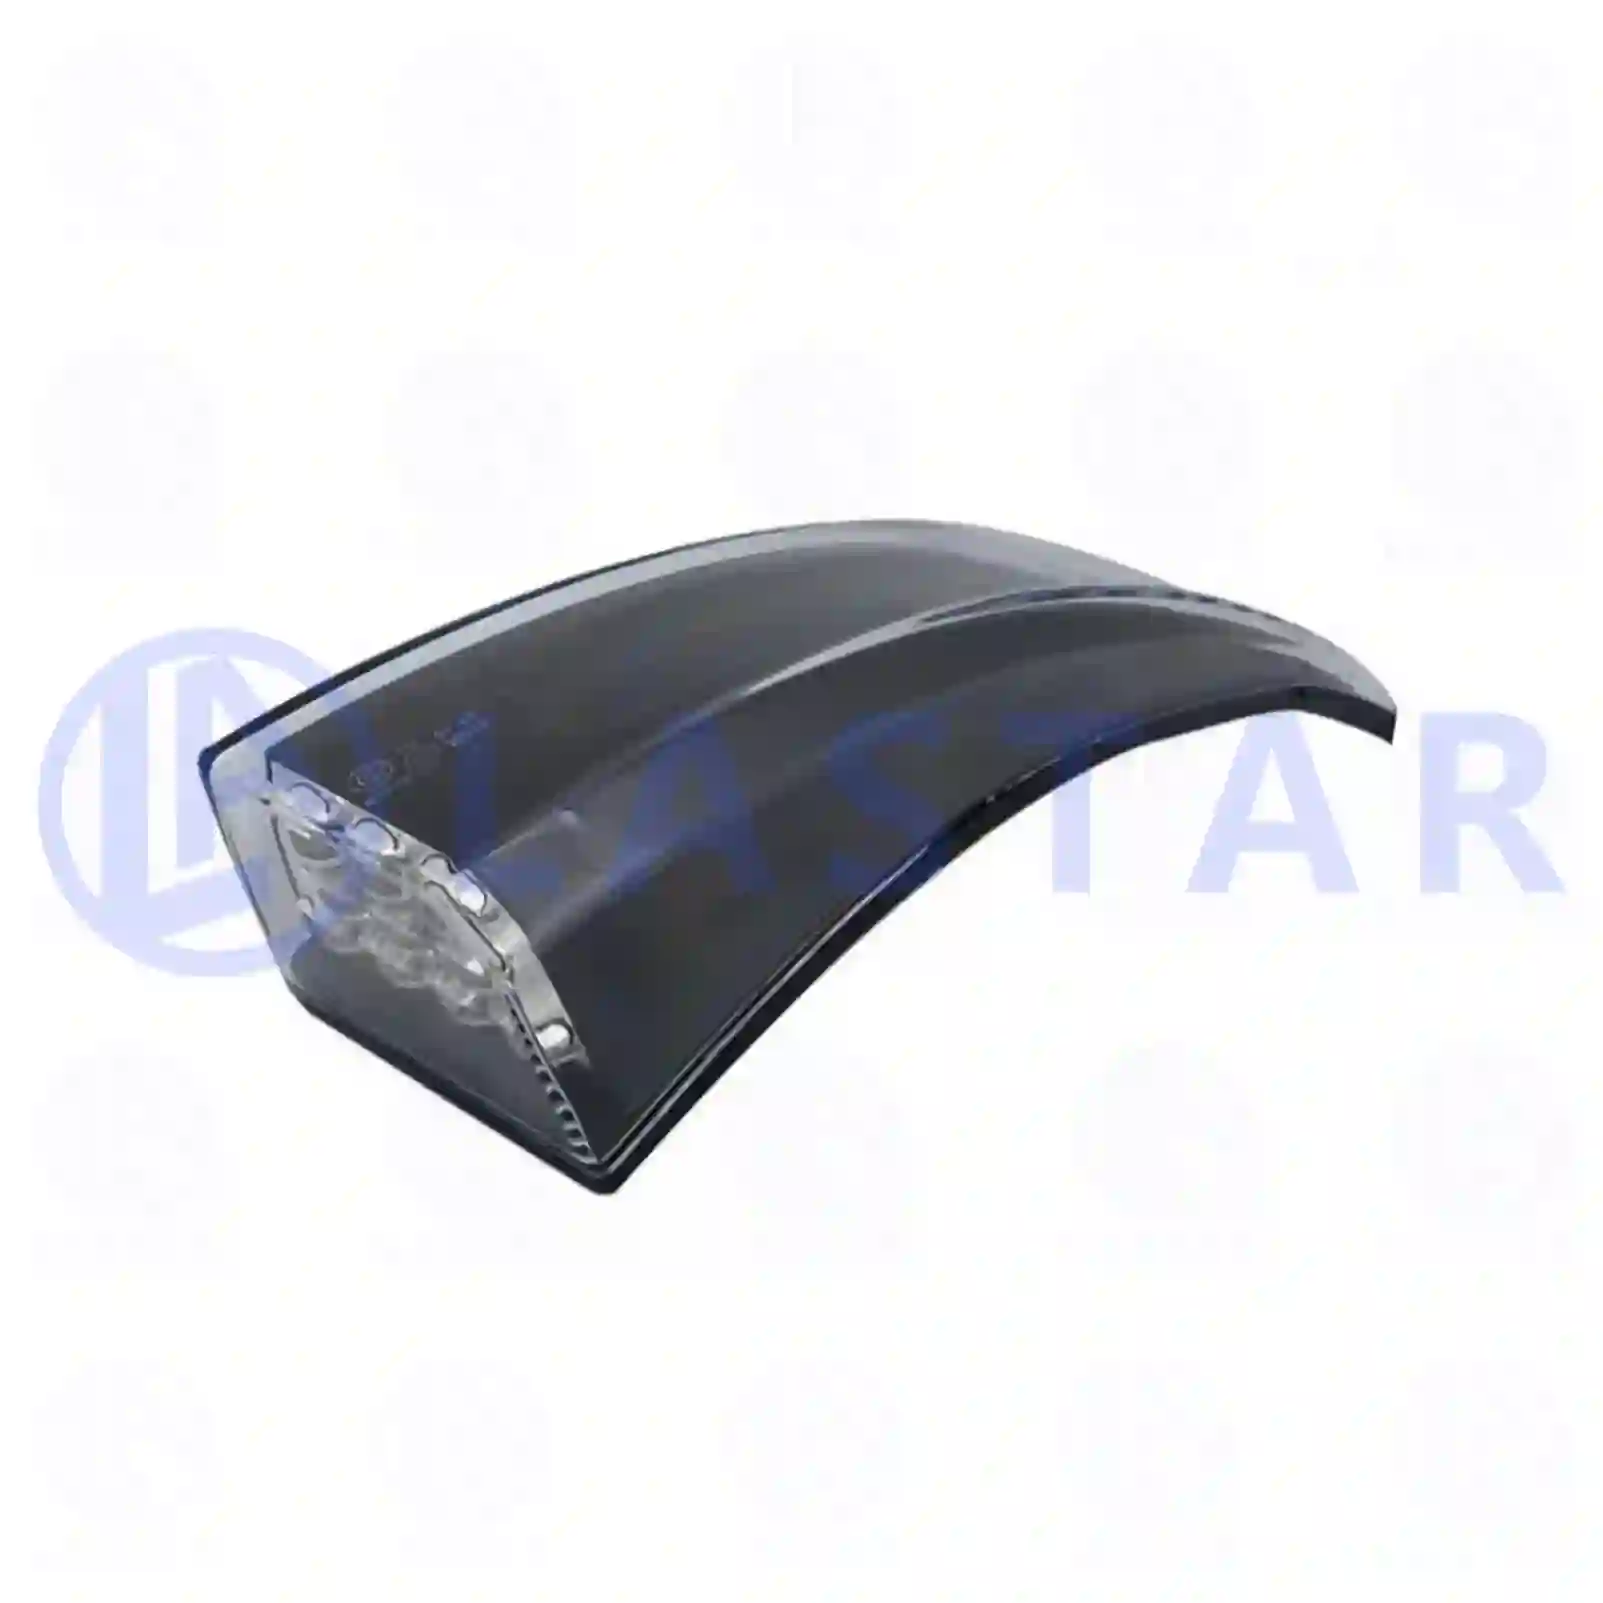 Turn signal lamp, lateral, left, black, 77711096, 21346521 ||  77711096 Lastar Spare Part | Truck Spare Parts, Auotomotive Spare Parts Turn signal lamp, lateral, left, black, 77711096, 21346521 ||  77711096 Lastar Spare Part | Truck Spare Parts, Auotomotive Spare Parts